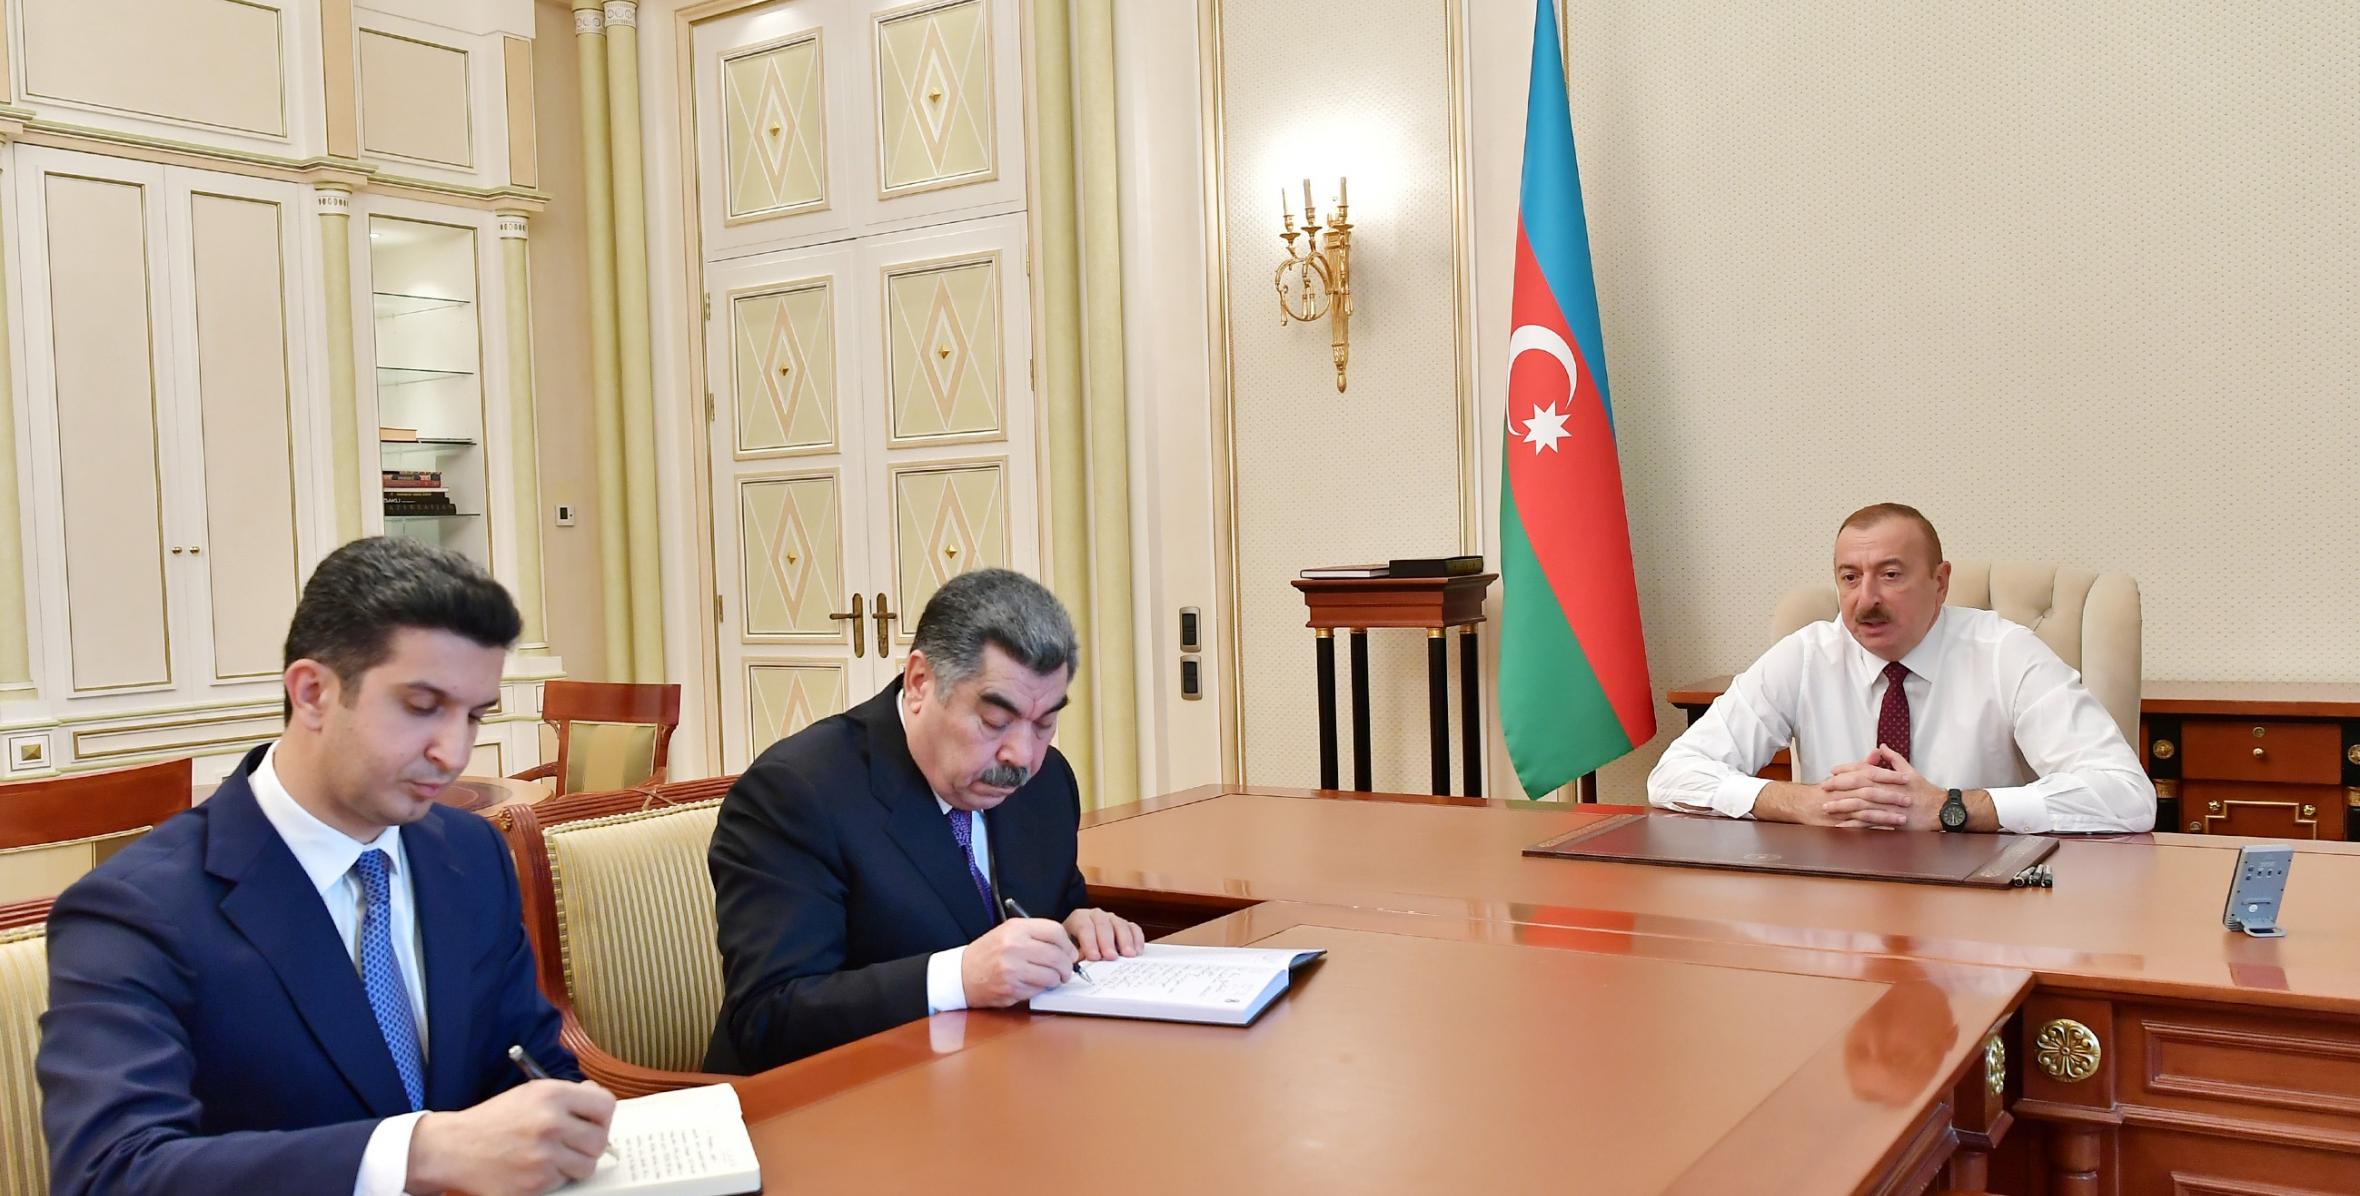 Ilham Aliyev received Rustam Khalilov on his appointment as head of Hajigabul District Executive Authority and Vugar Novruzov on his appointment as head of Naftalan City Executive Authority